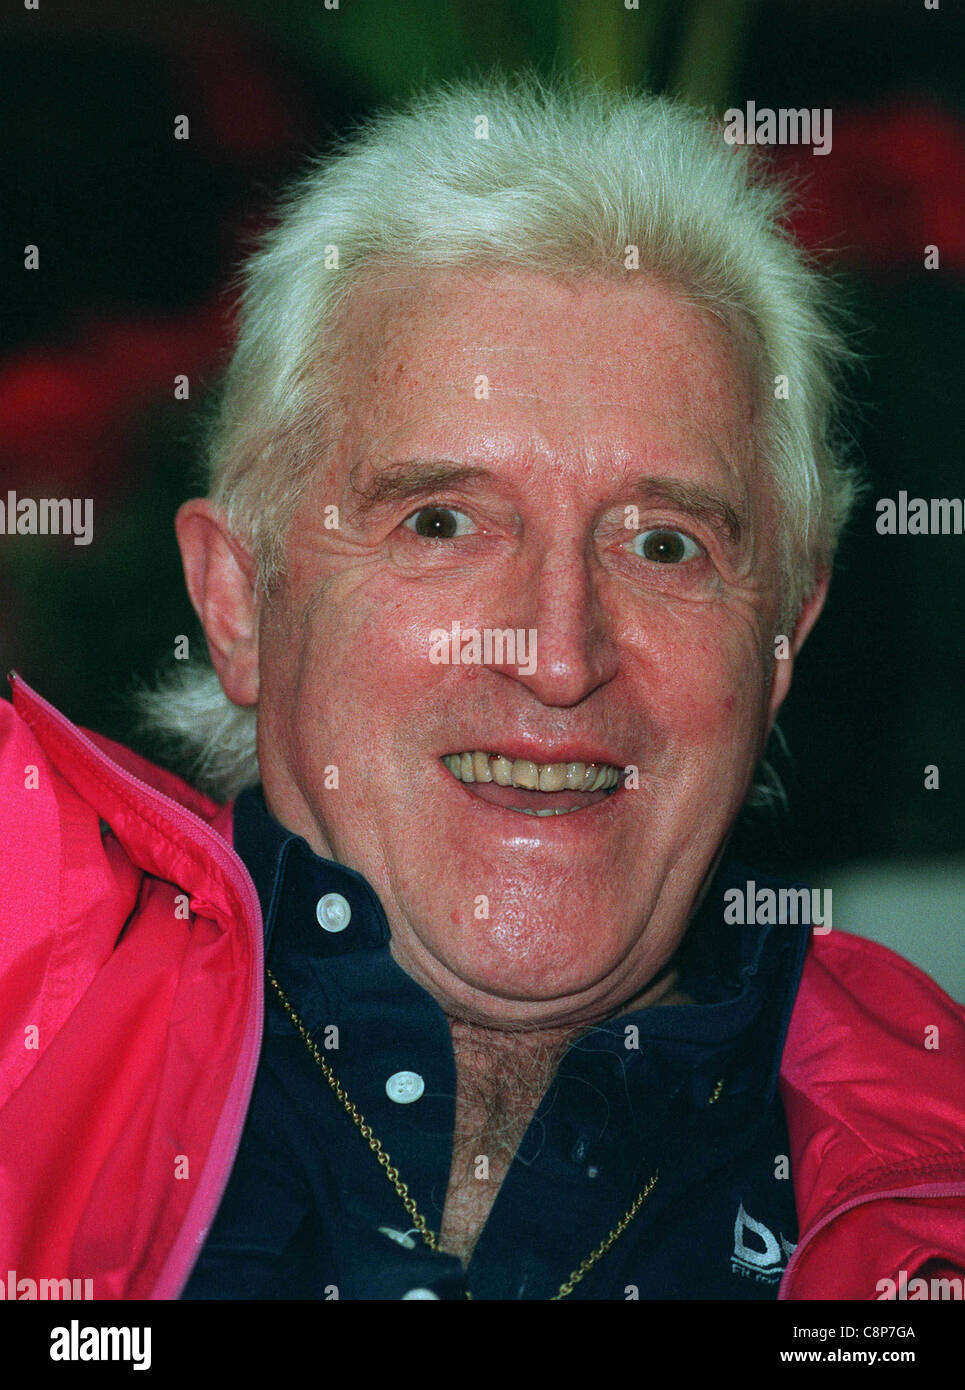 Jimmy Savile High Resolution Stock Photography and Images - Alamy